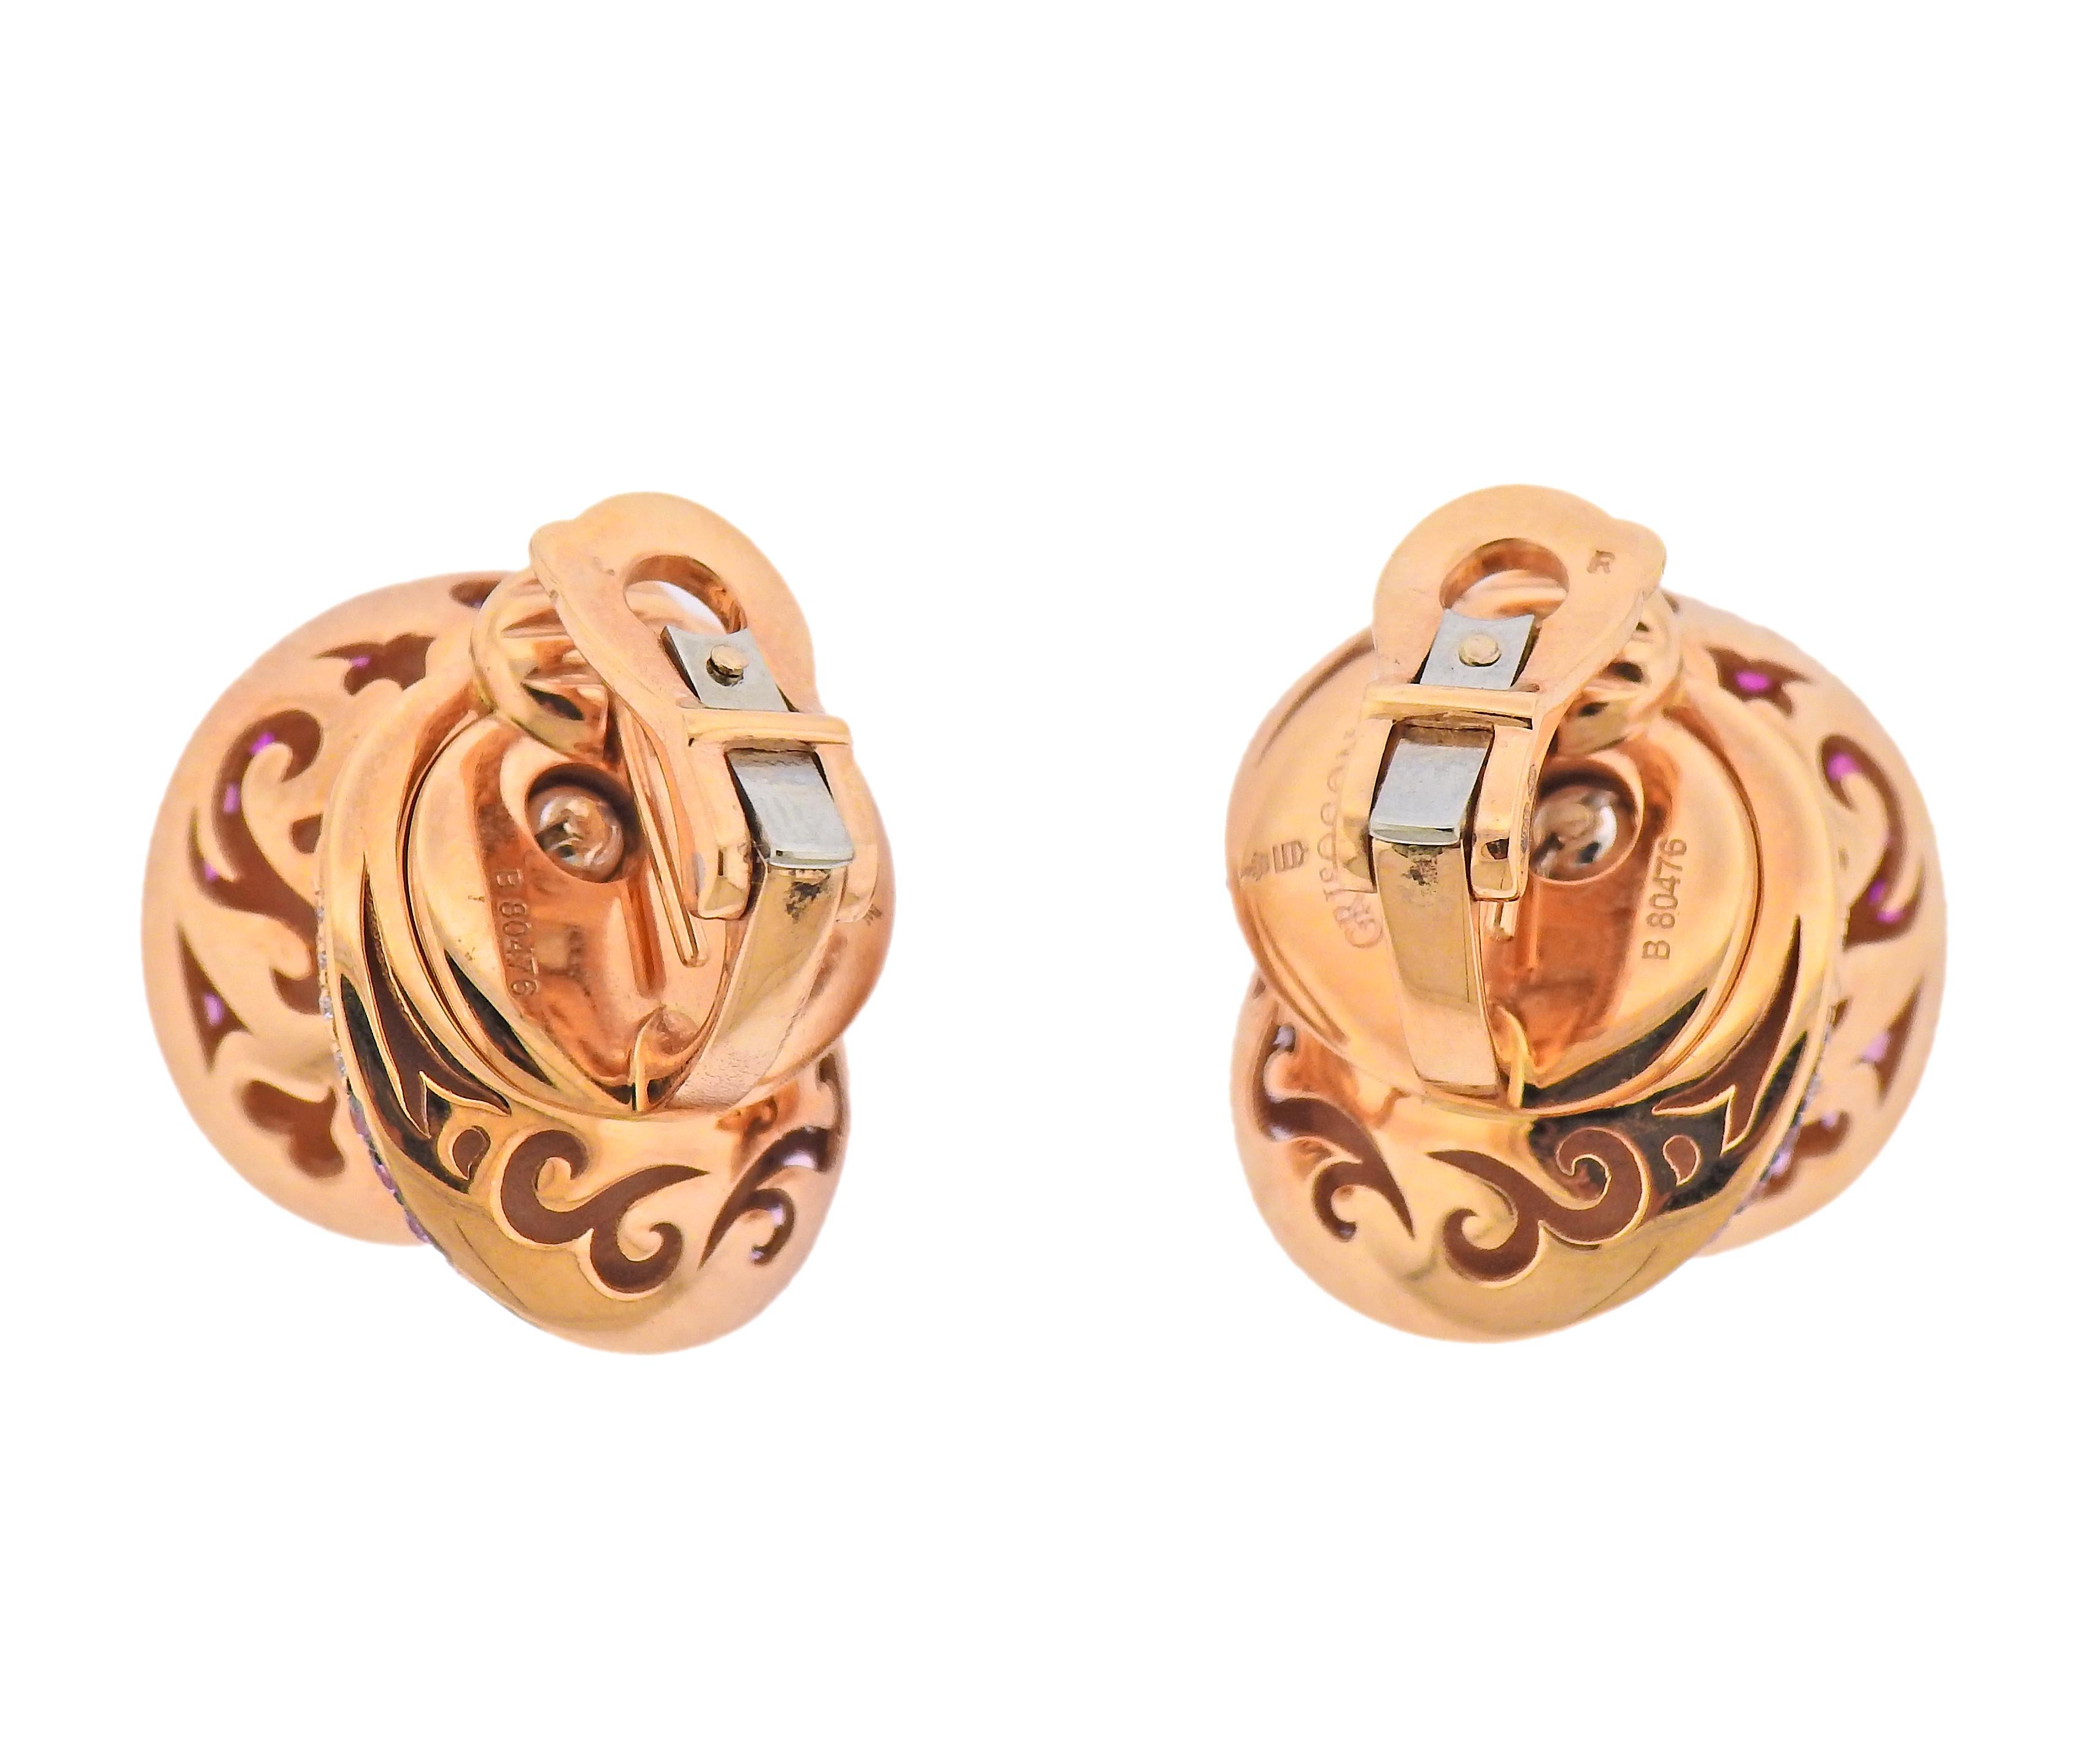 Brand new 18k rose gold Chiocciolina earrings by De Grisogono, with 0.25ctw in G/VS diamonds, 0.99ctw in pink sapphires, 1.00ctw in pink sapphire briolettes and 2.00ctw in rubellites . Earrings are 23mm x 18mm. Marked - de Grisogono, Au750, B80476.